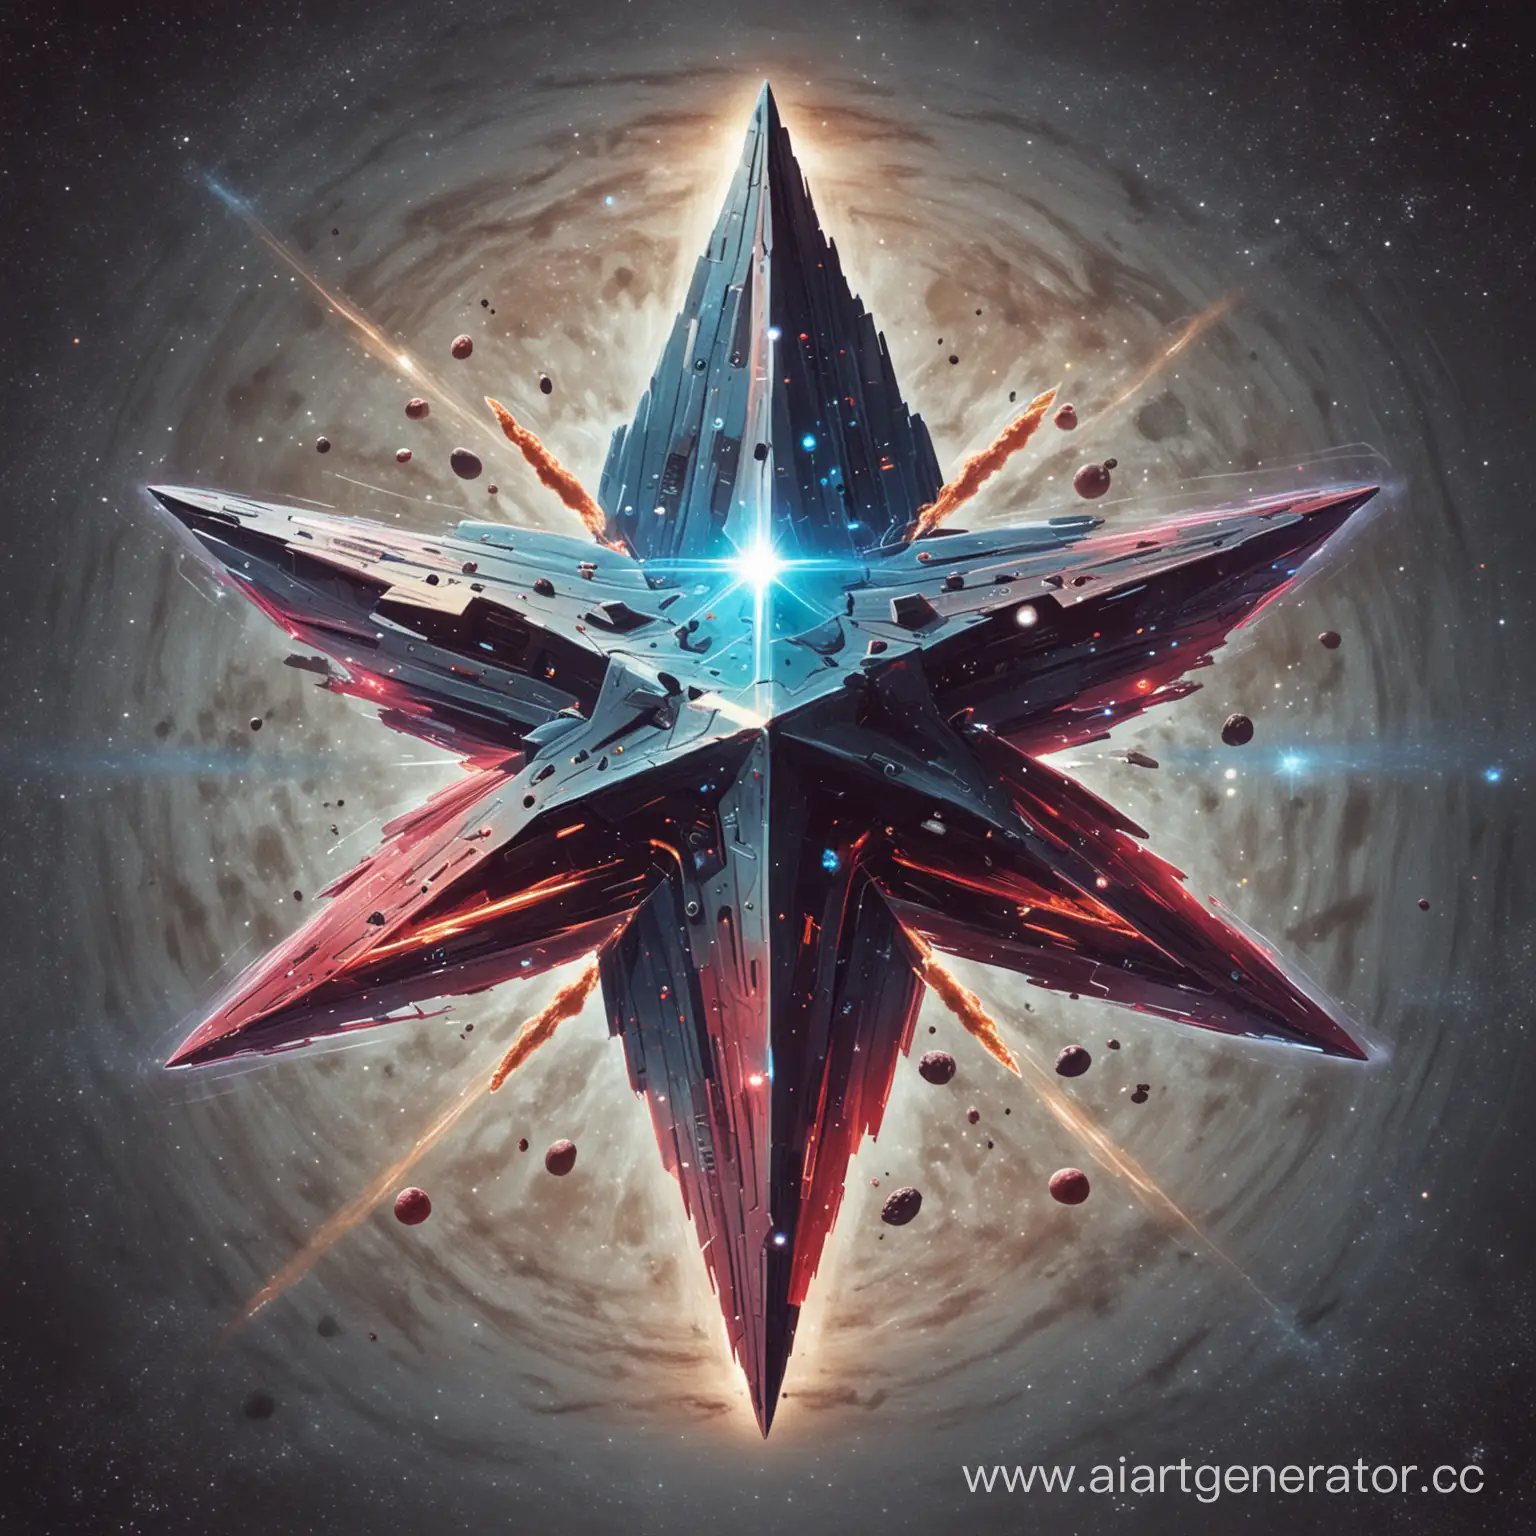 AsterStron